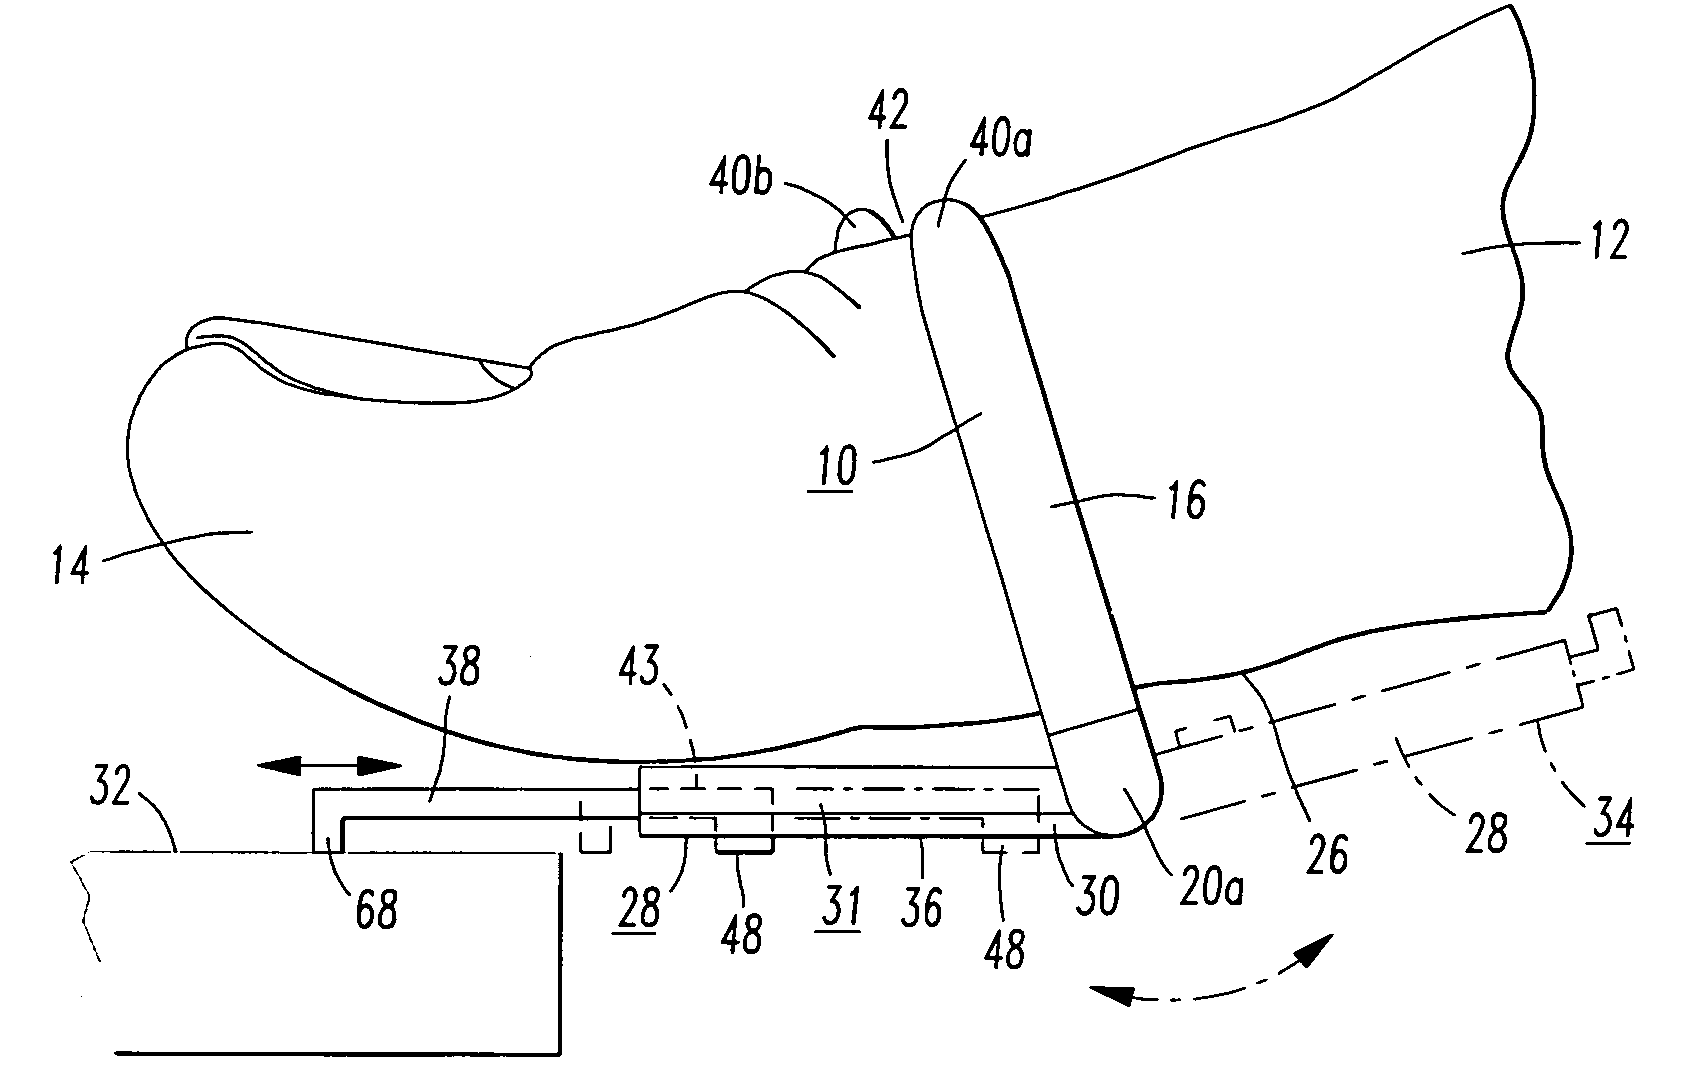 Ornamental thumb or finger ring with secured hidden contact interface input device